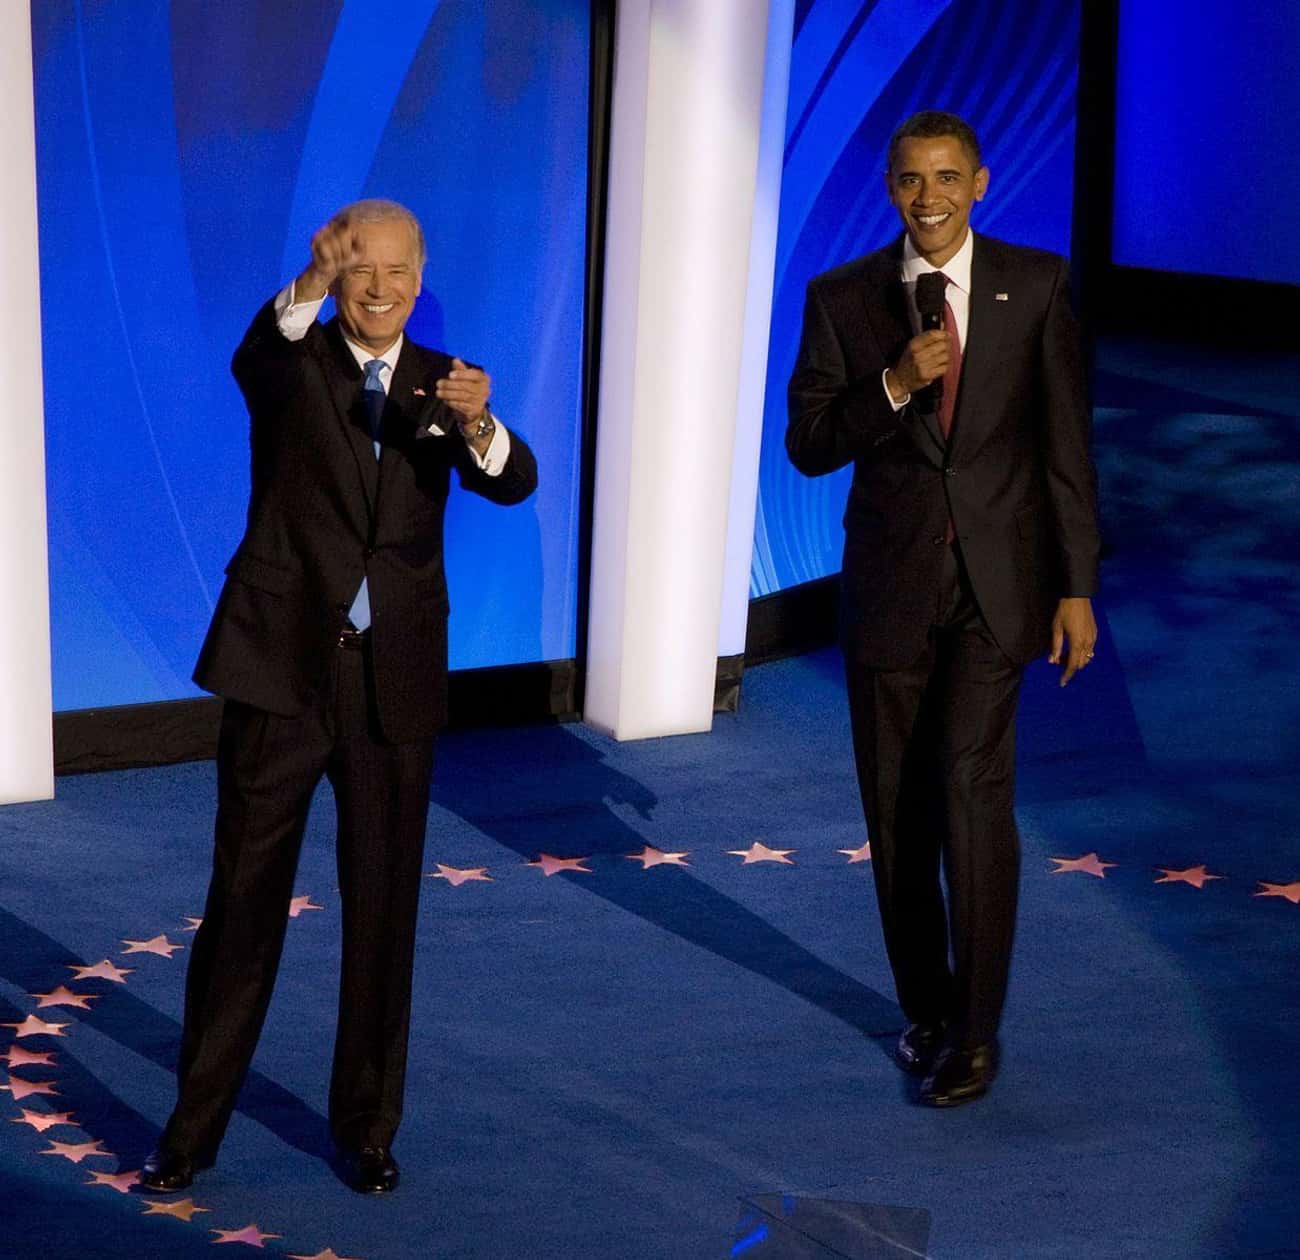 August 23, 2008: Obama Picked Biden As His Running Mate